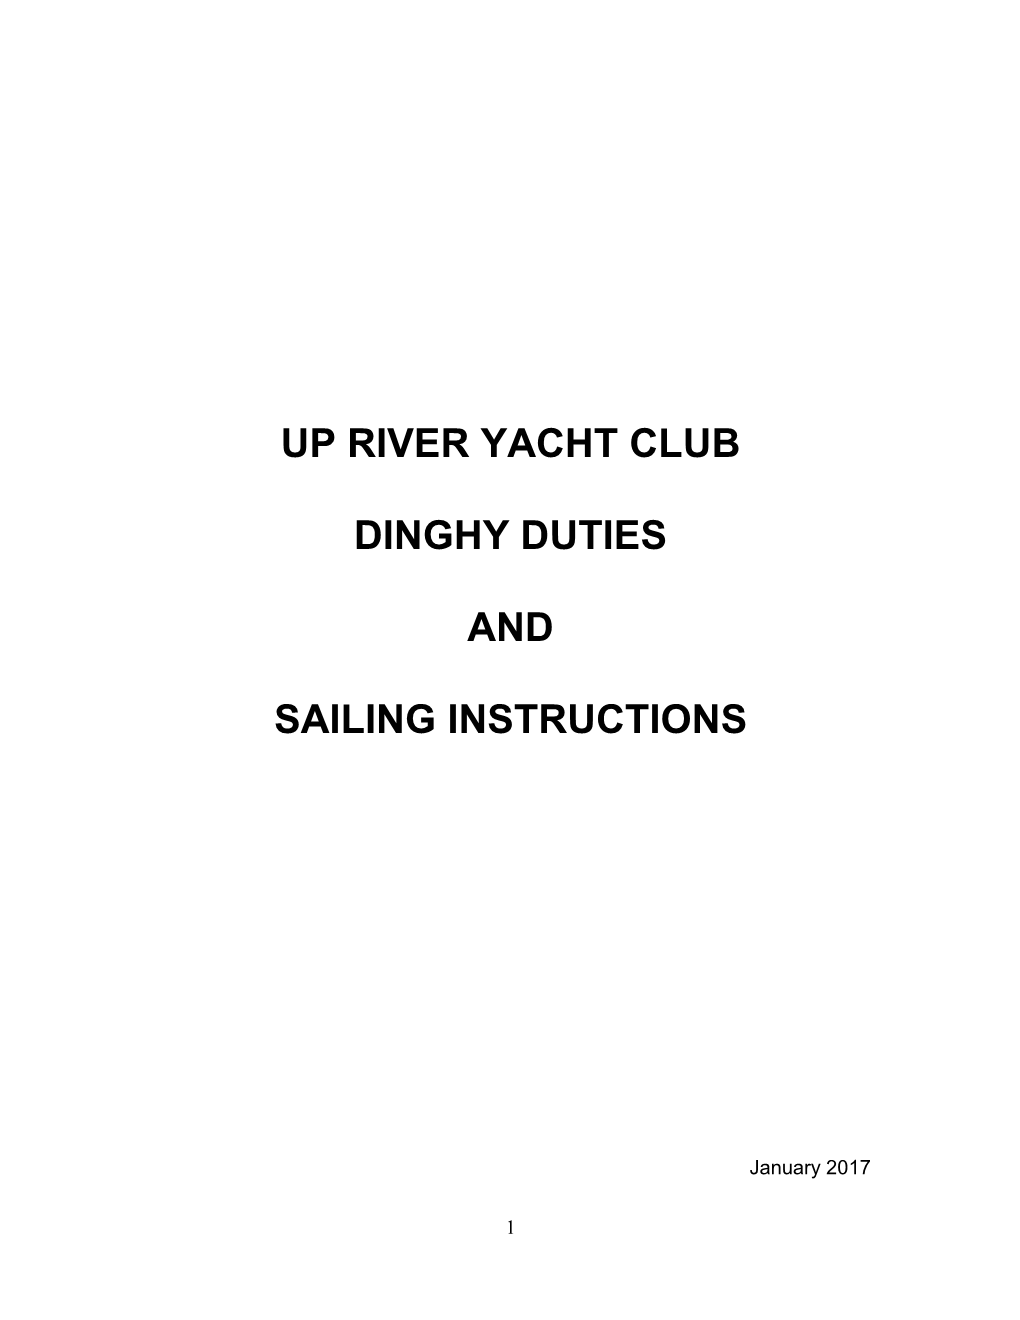 Up River Yacht Club Dinghy Duties and Sailing